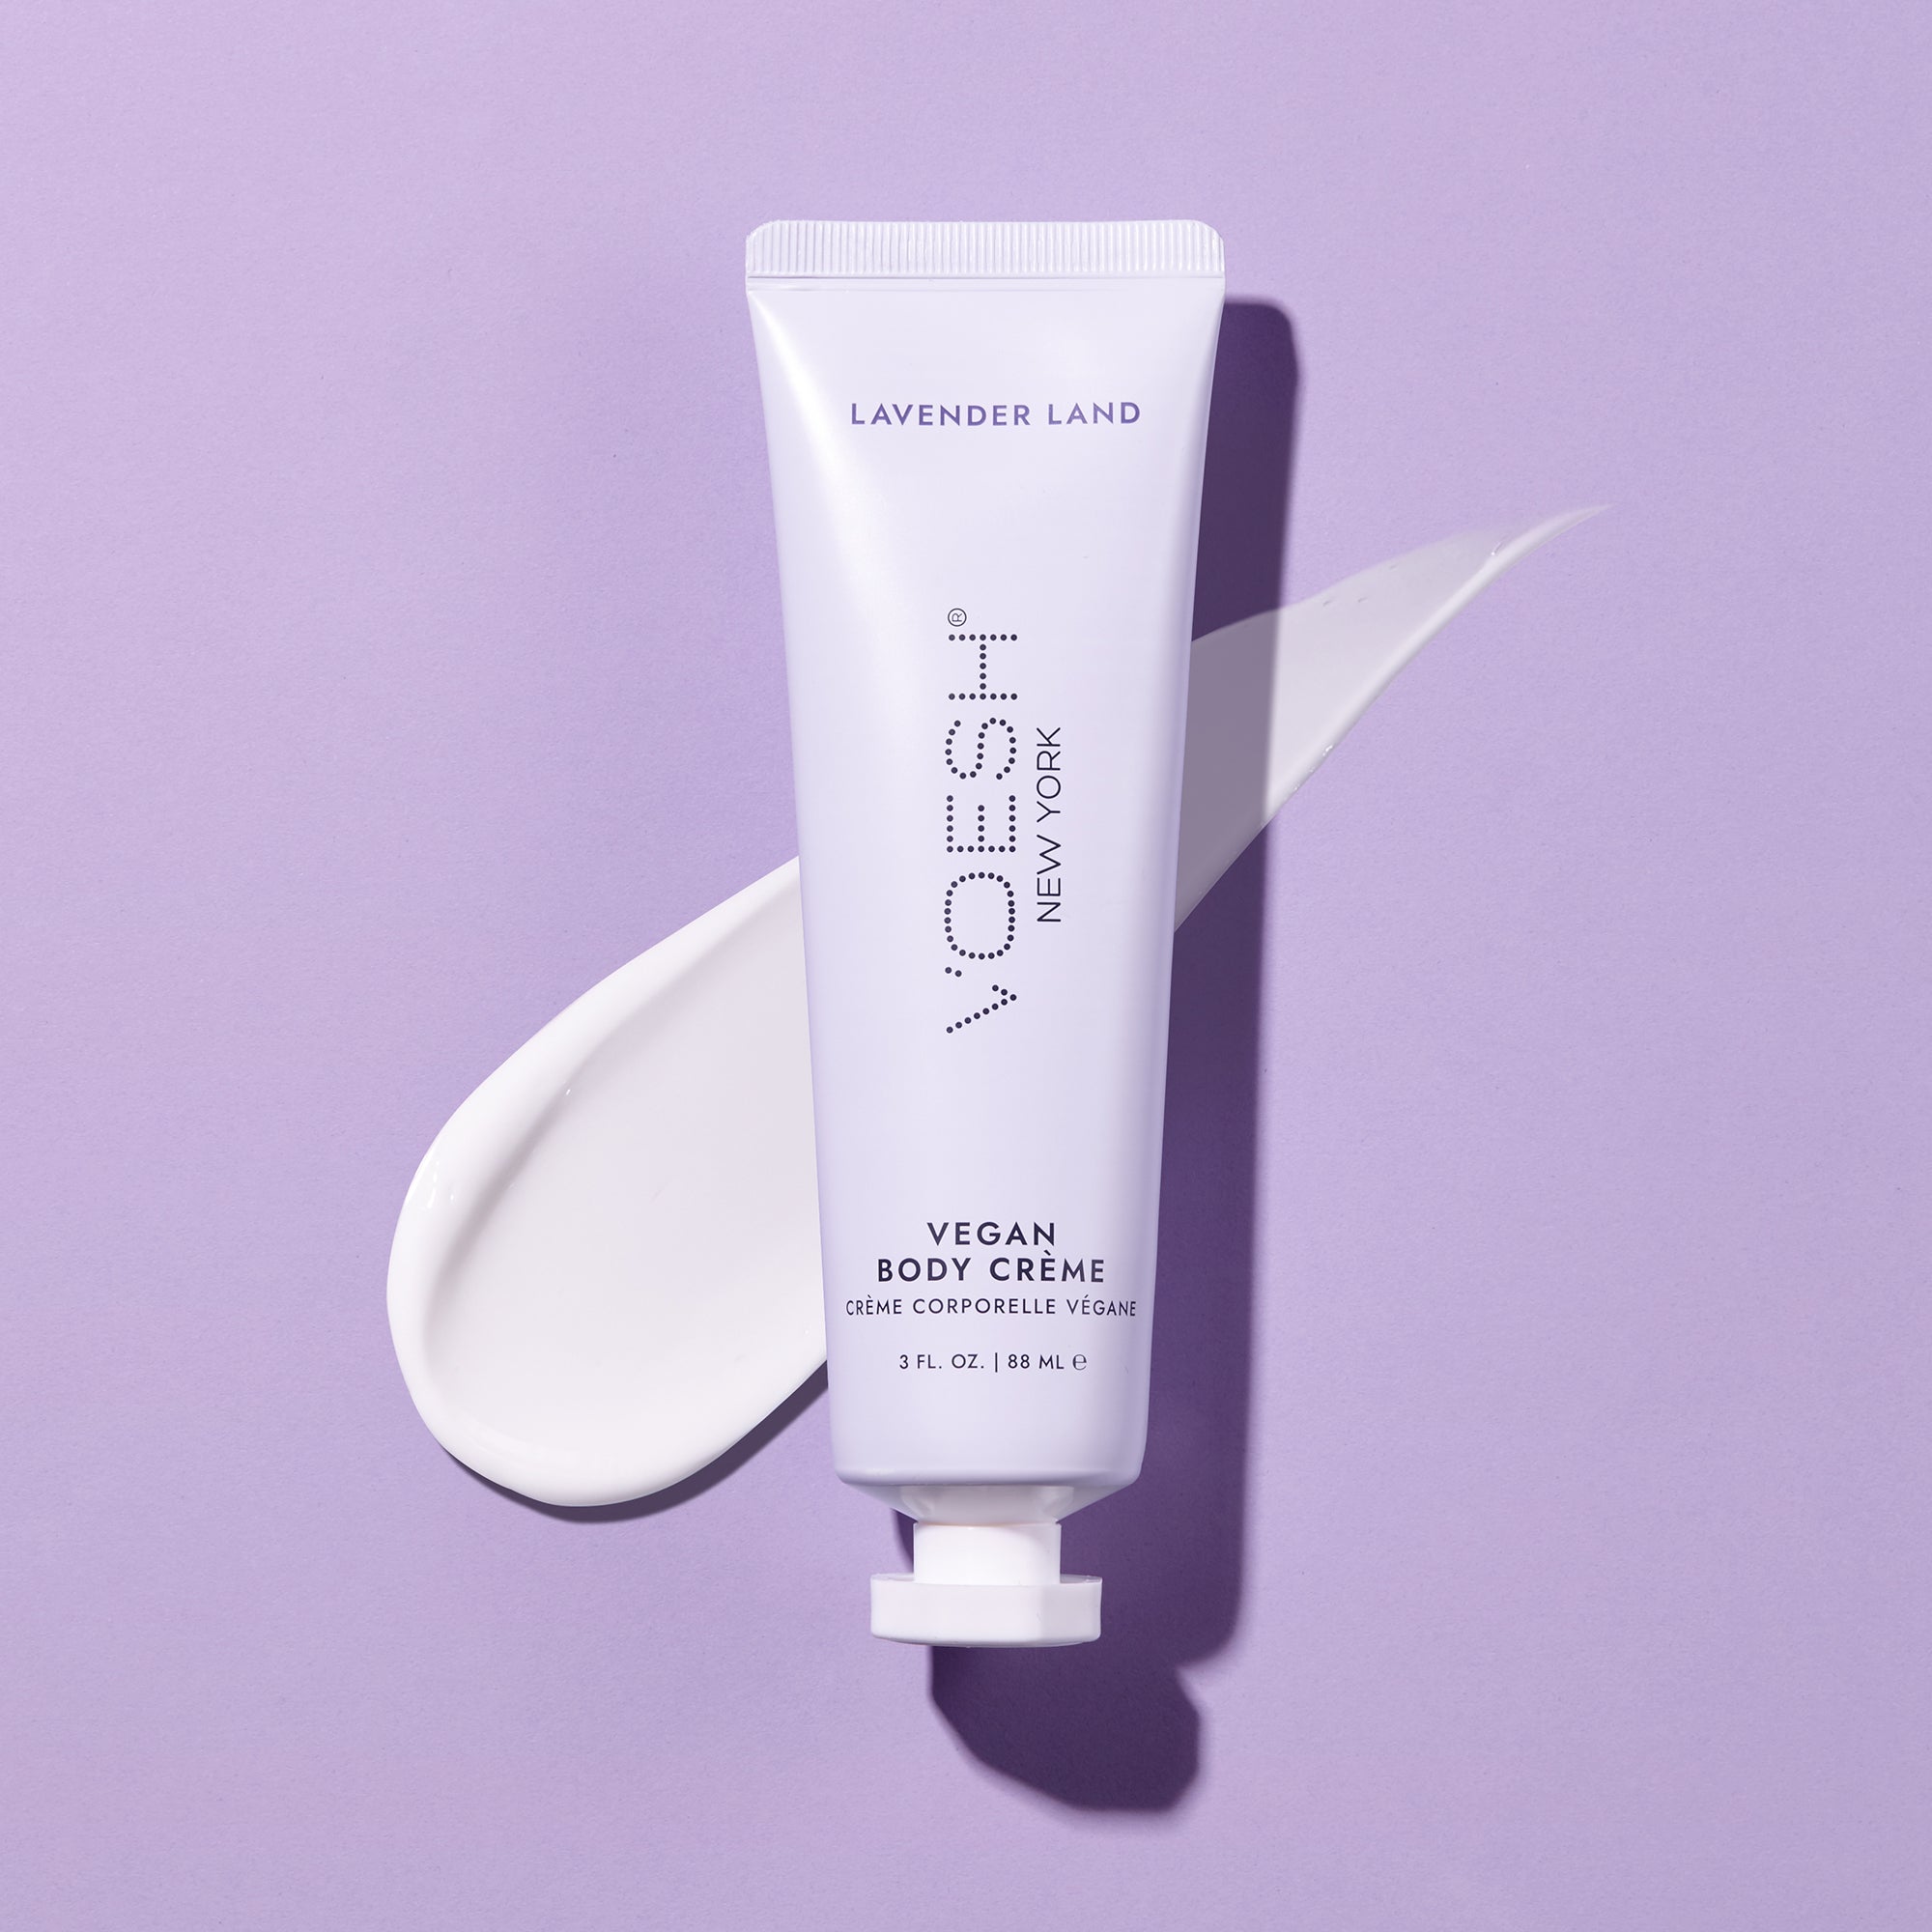 Vegan Body Crème Lavender Land pictured on top of the lotion’s texture on a purple background.